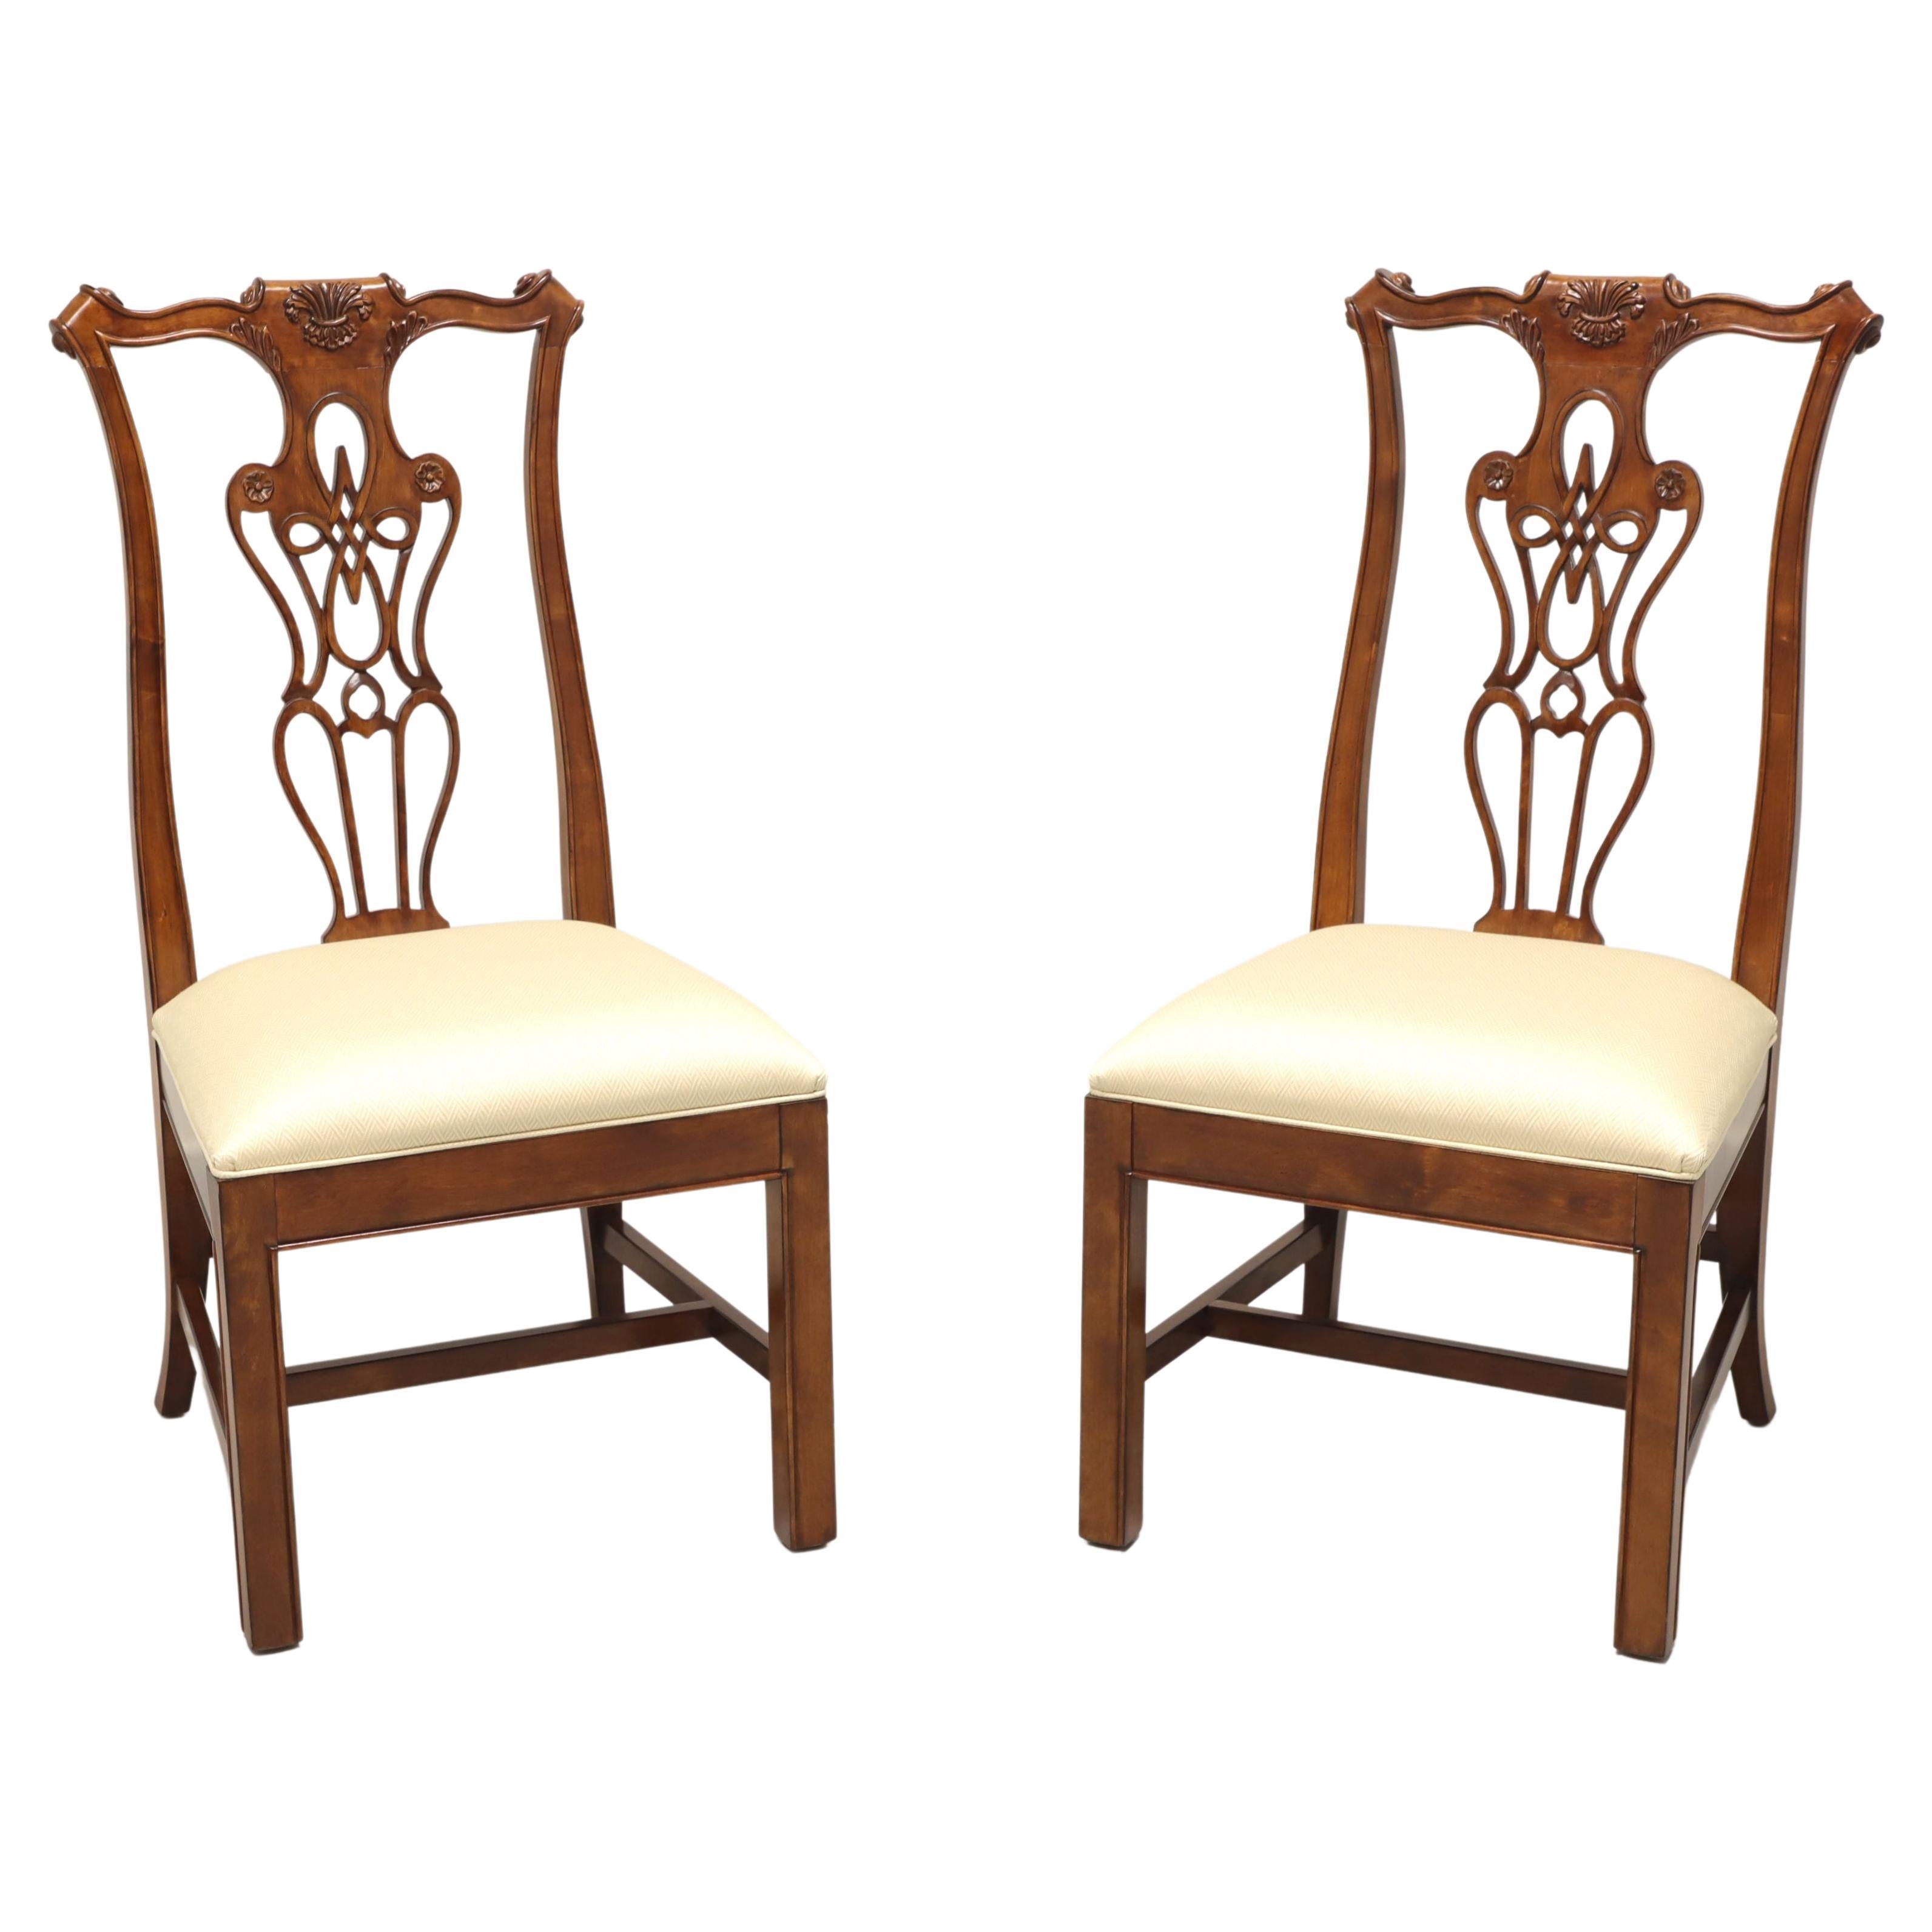 HARDEN Solid Cherry Chippendale Style Straight Leg Dining Side Chairs - Pair B